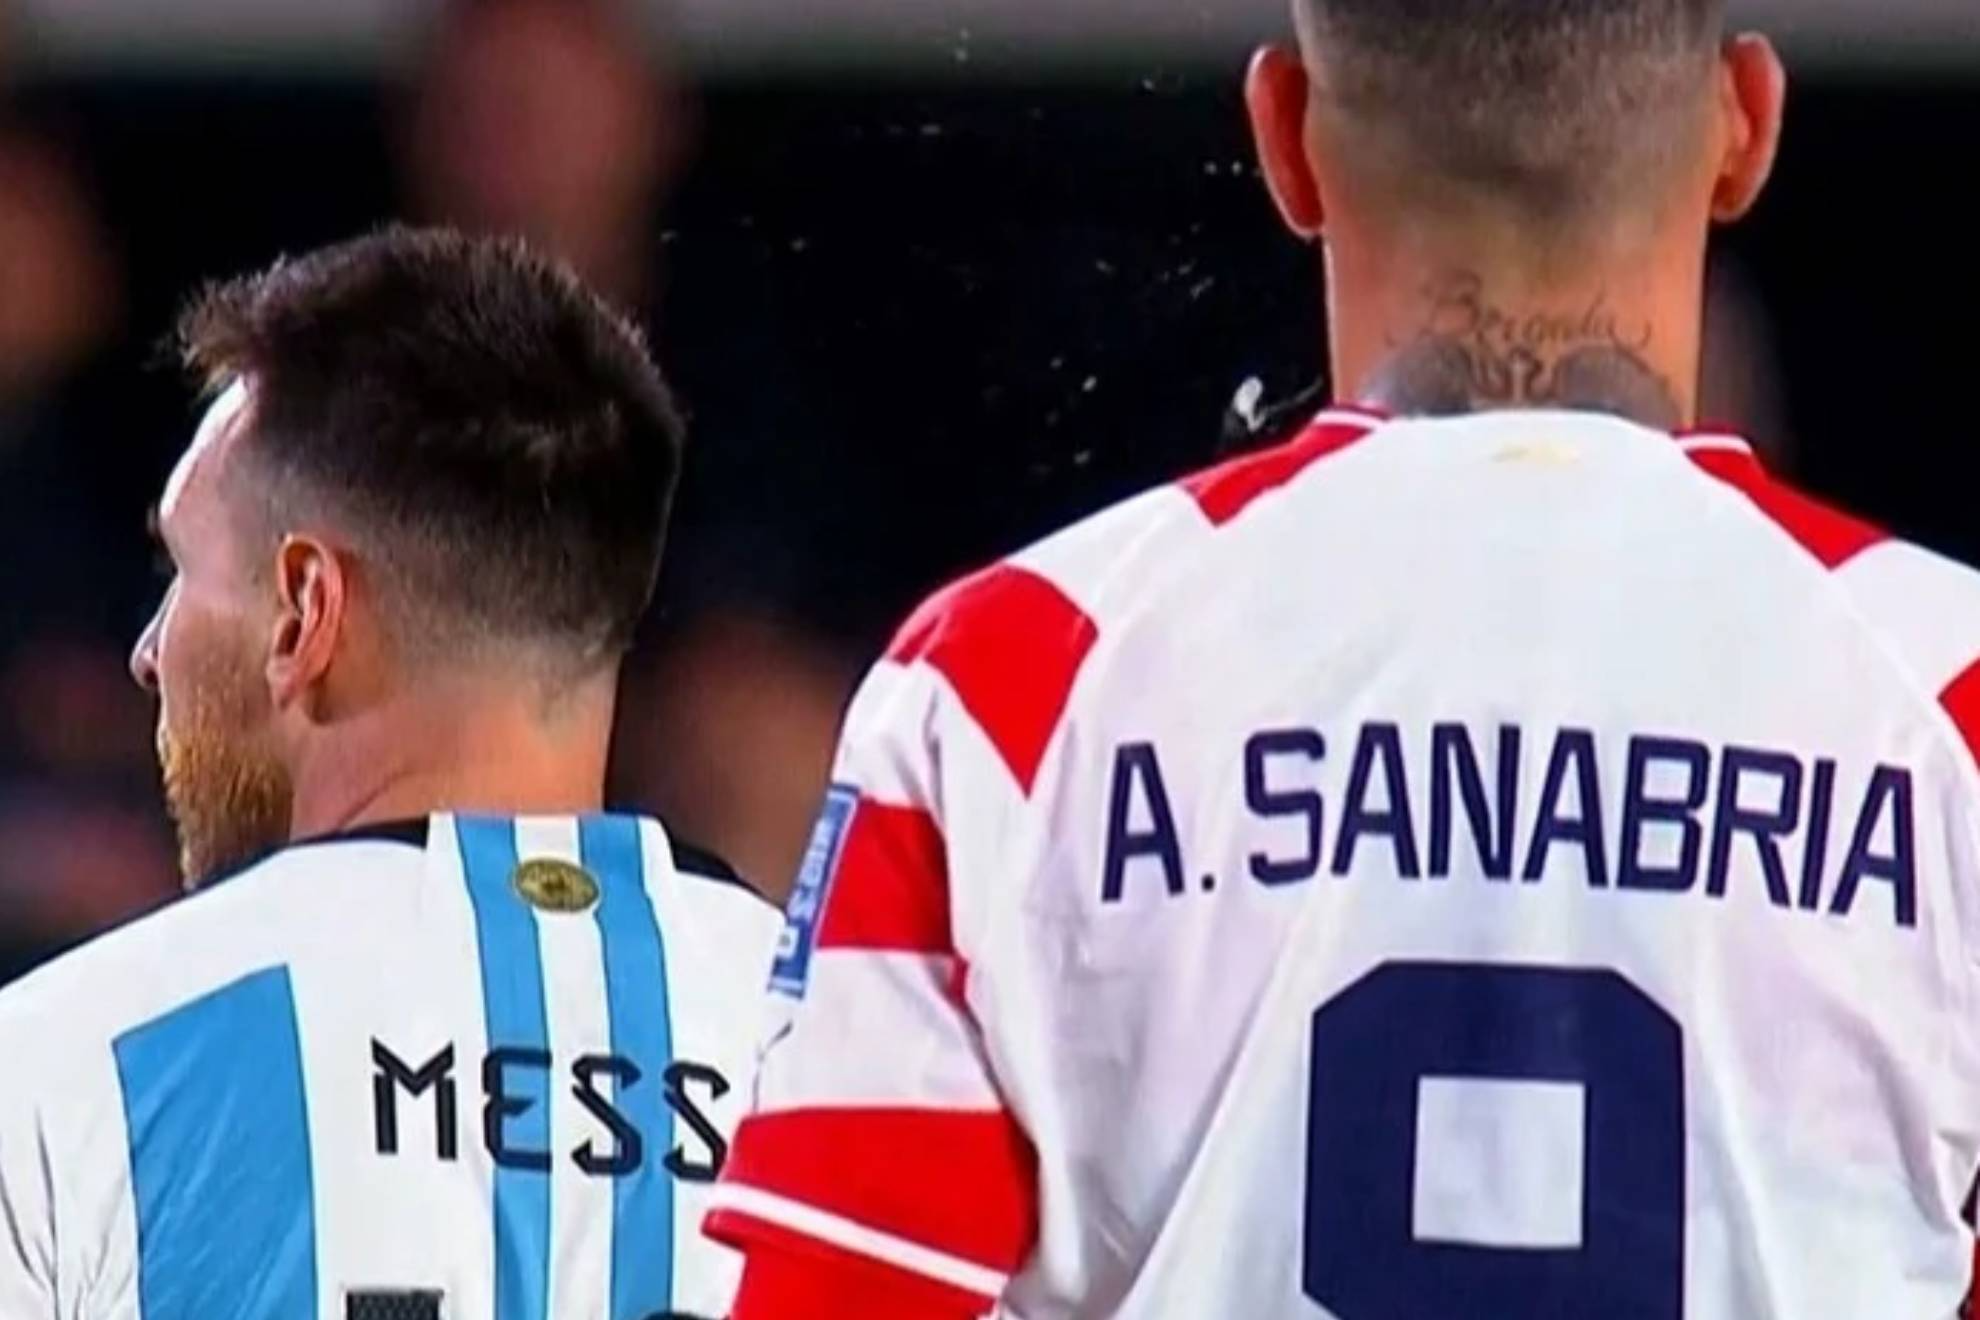 Messi Comments On Sanabria's Spit In His Direction: I Don't Know This Guy